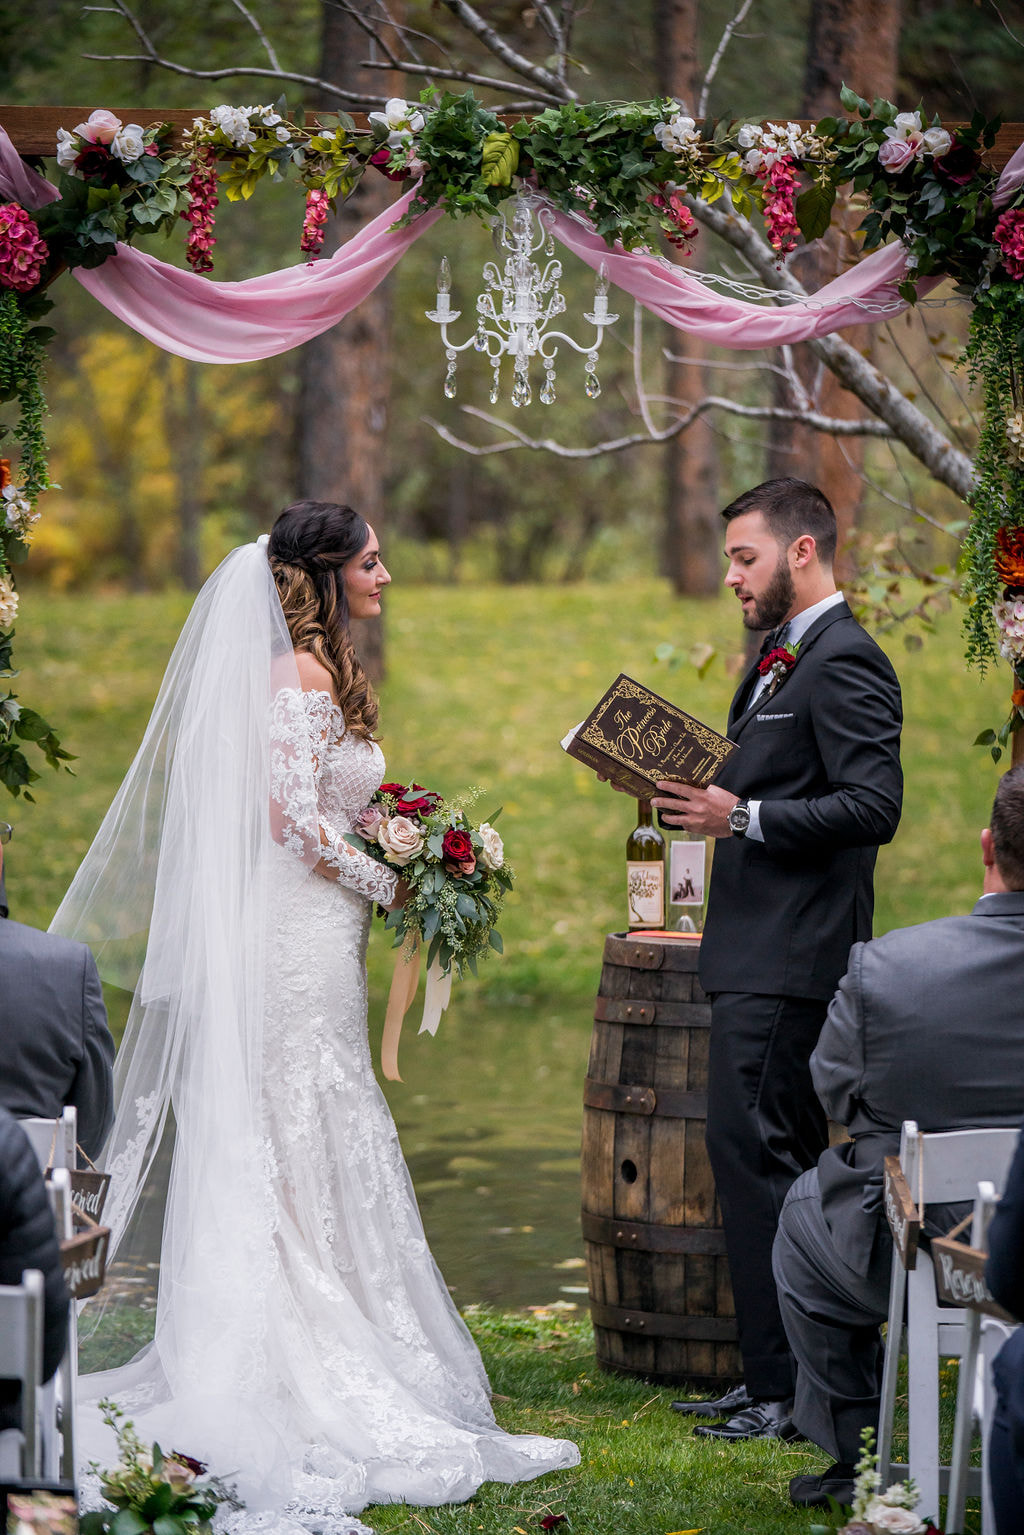 bride and groom read vows to each other from the princess bride book during romantic colorado wedding ceremony at dunafon castle